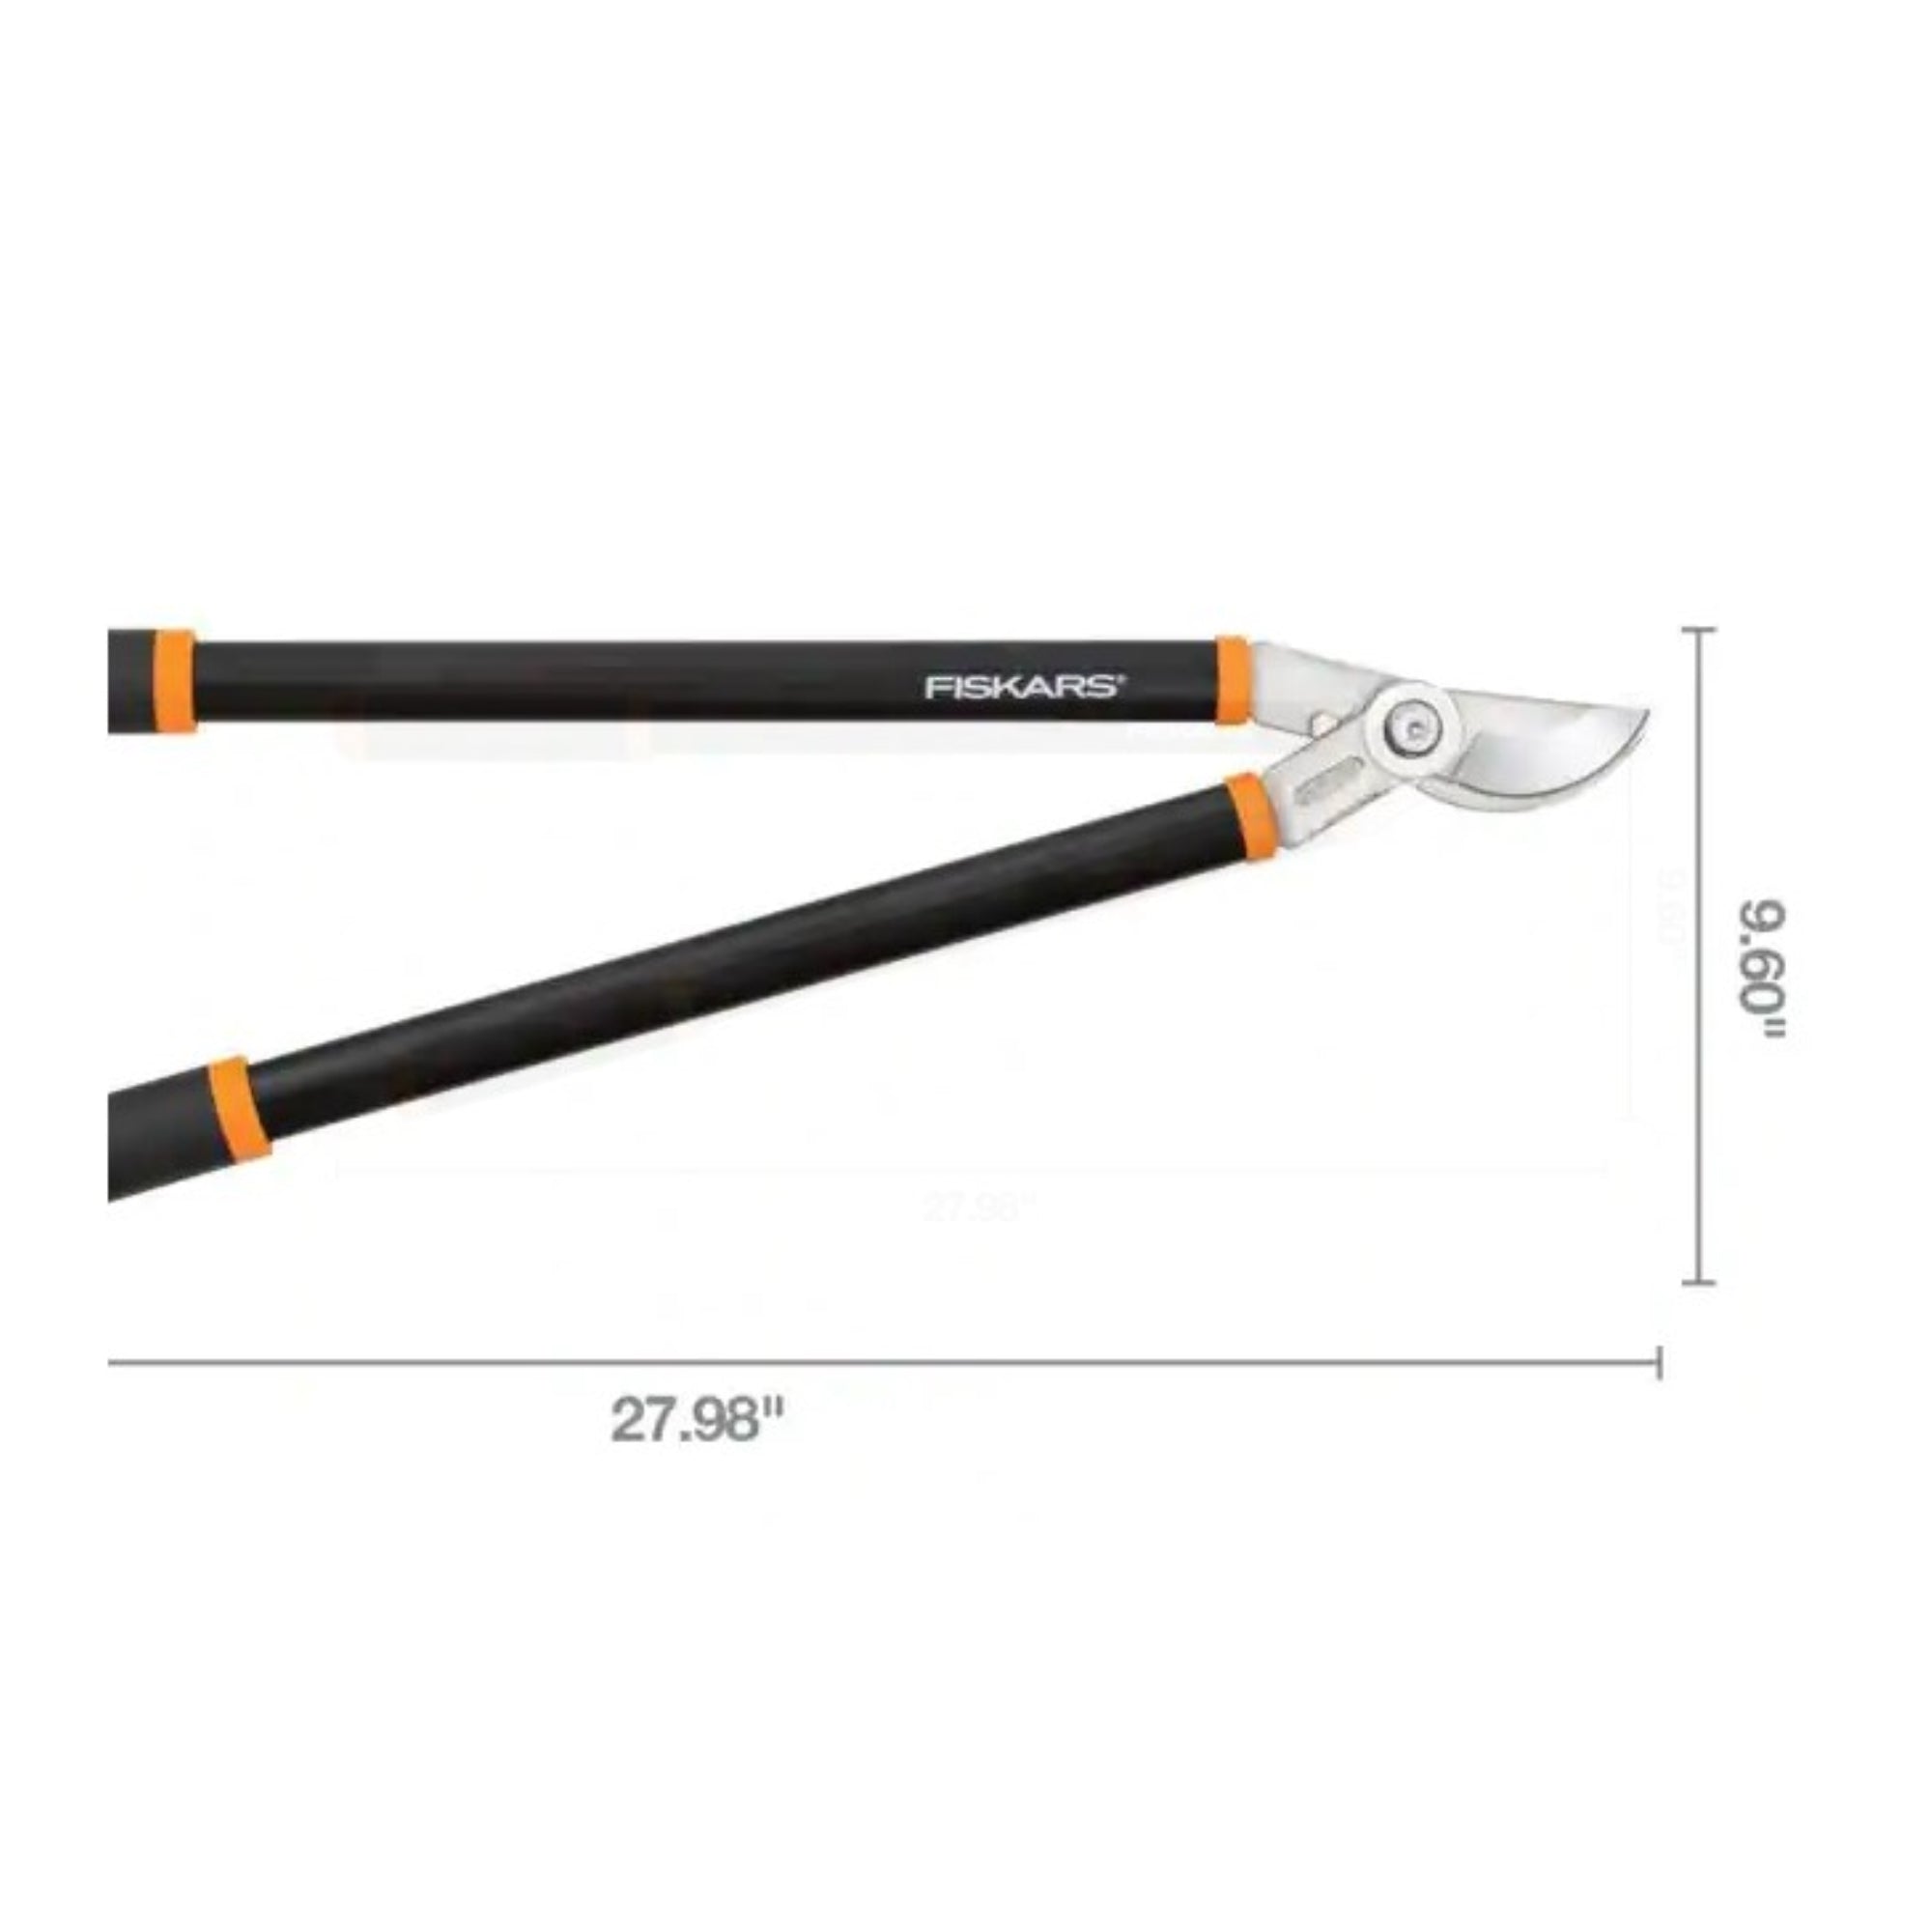 Fiskars Forged Bypass Lopper, 28" with 1.75" Diameter Cutting Capacity